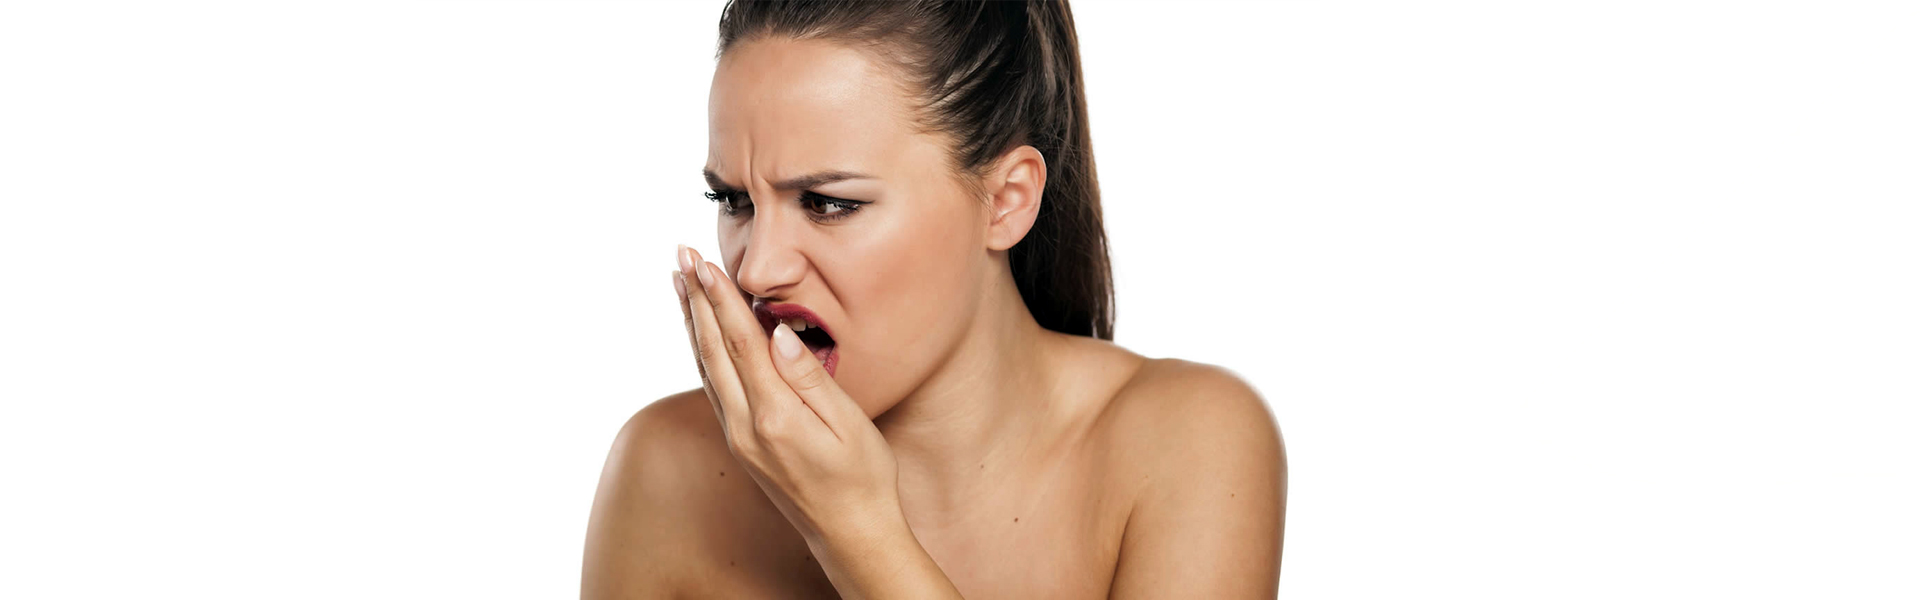 The Battle Against Bad Breath 